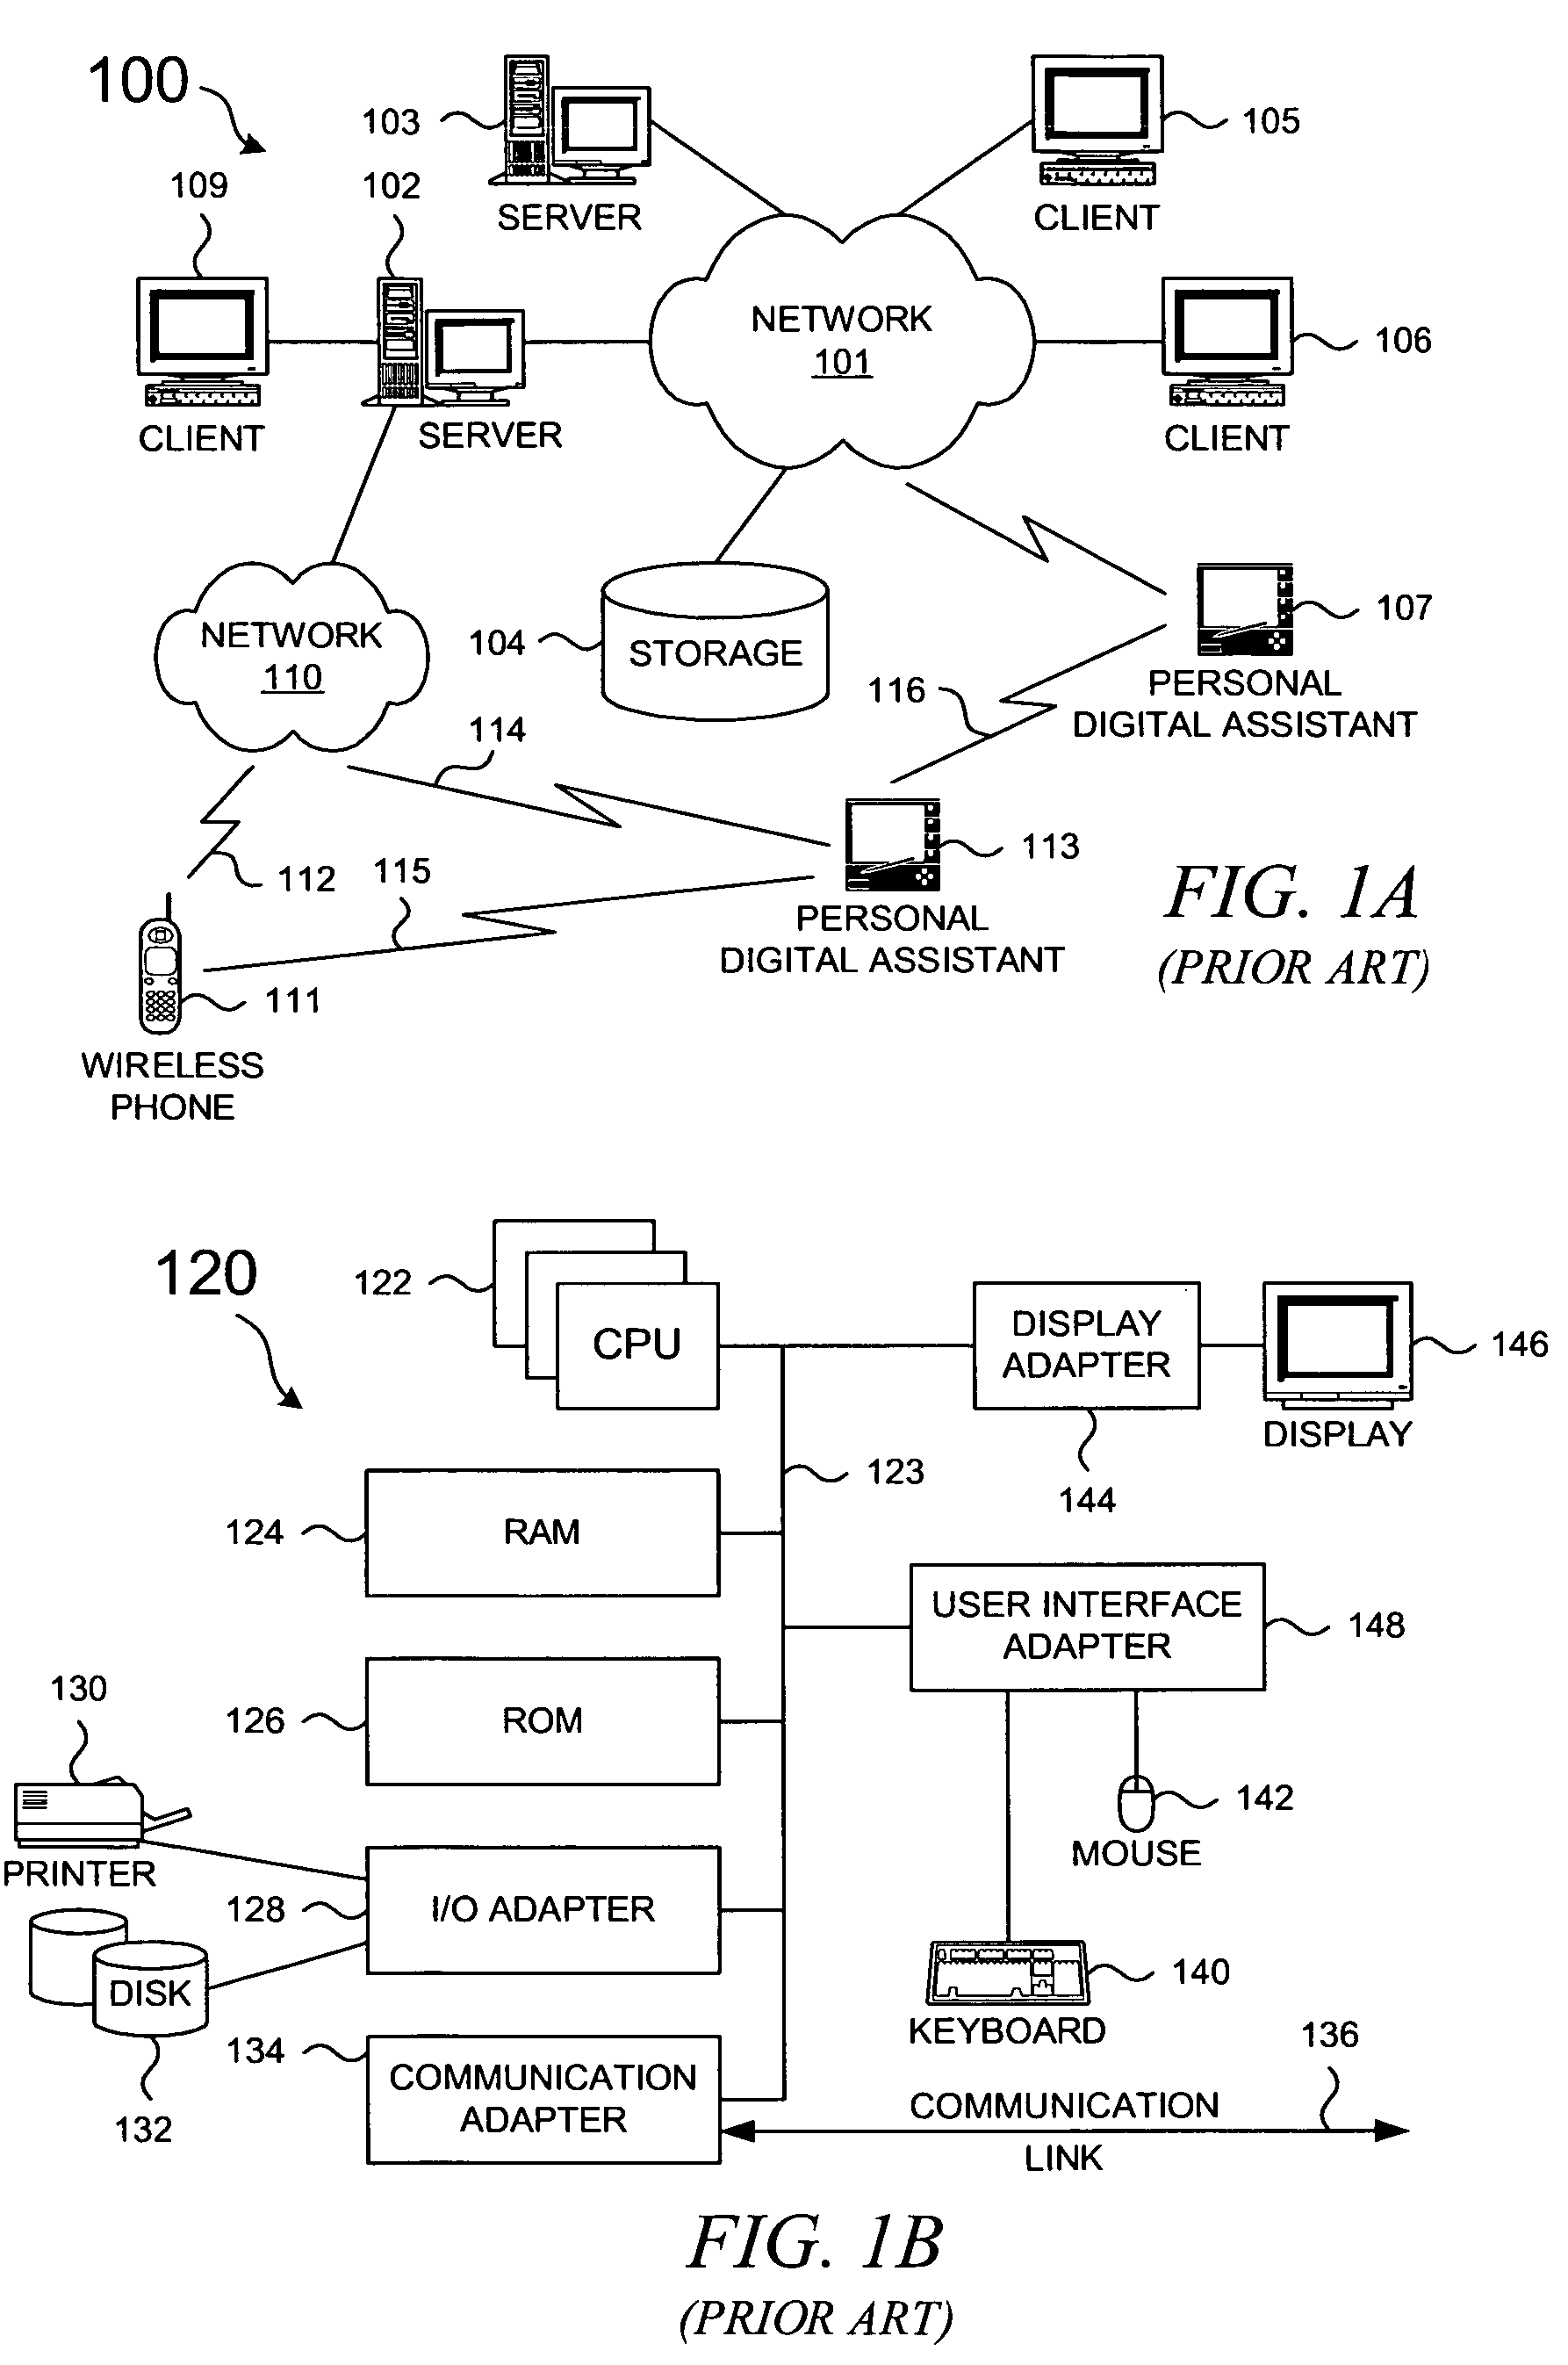 Method and system for a runtime user account creation operation within a single-sign-on process in a federated computing environment